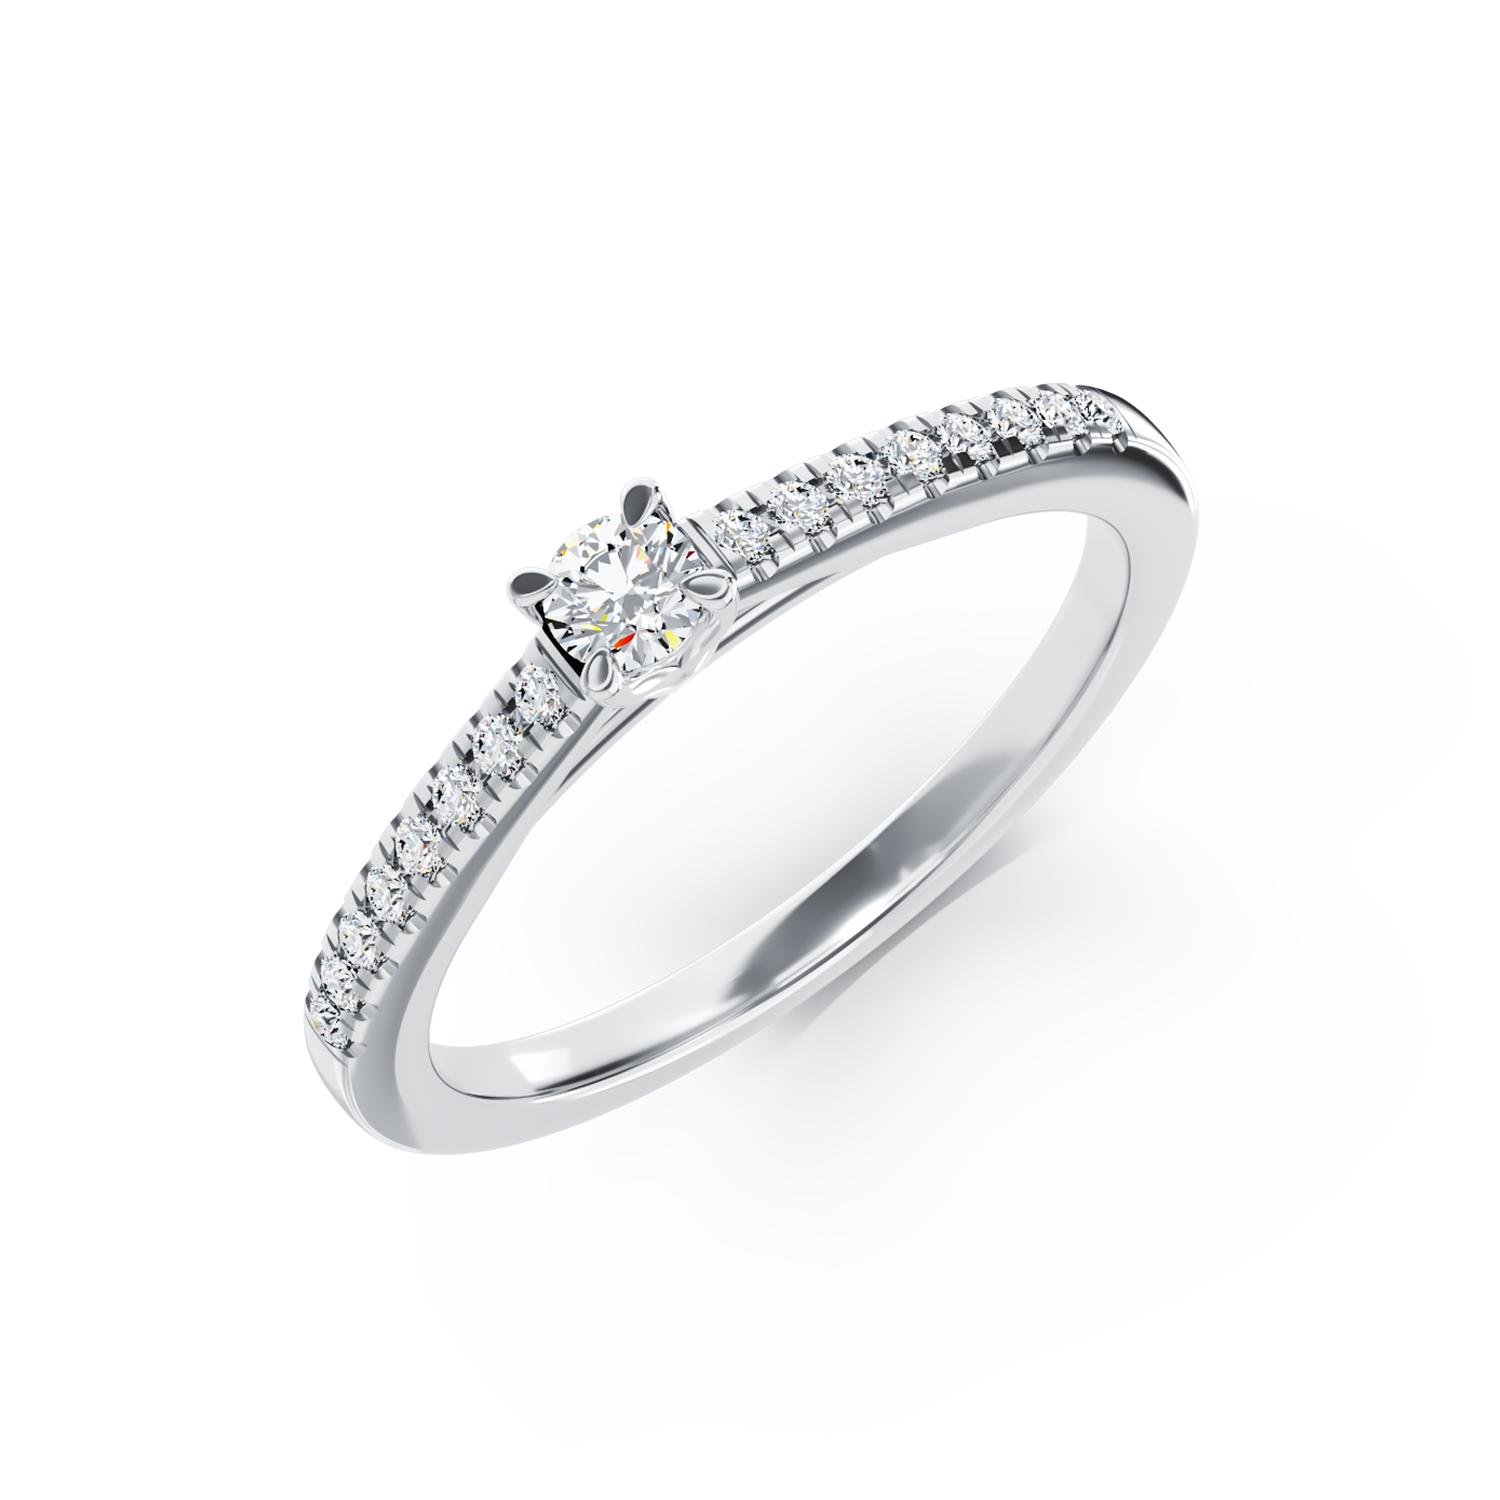 18K white gold engagement ring with 0.2ct diamond and 0.19ct diamonds